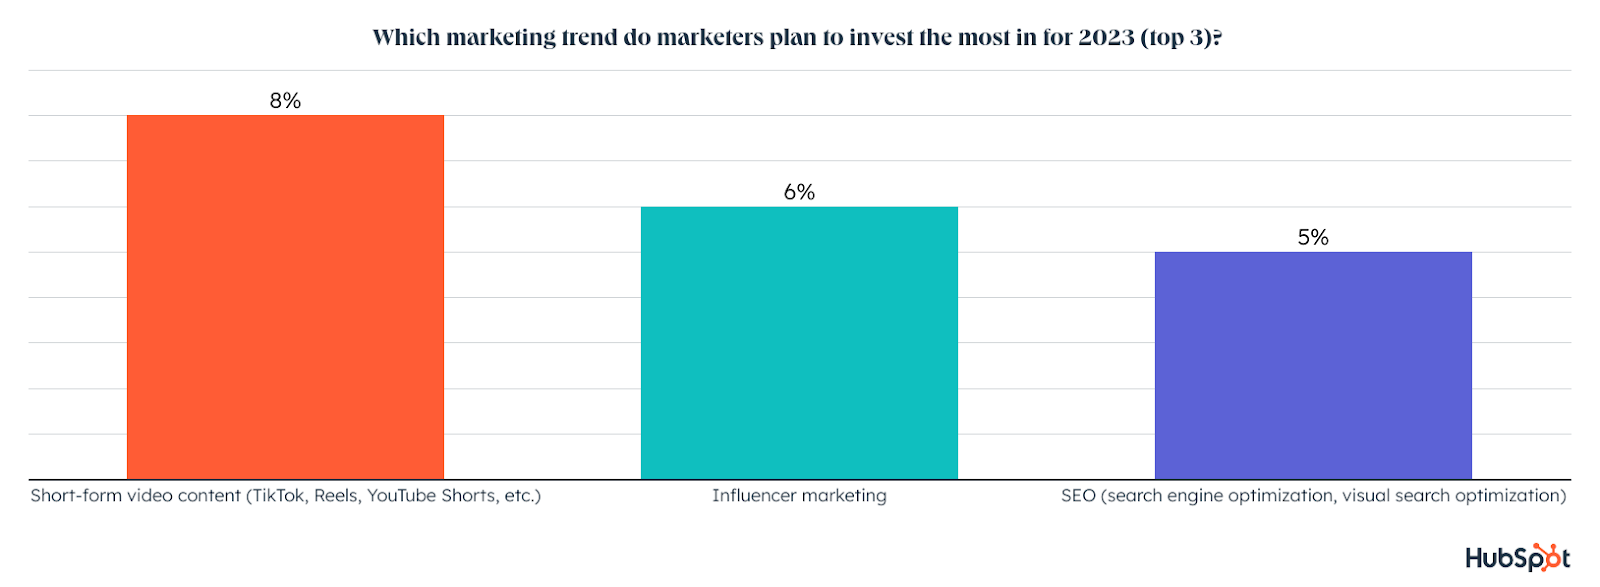 which trend will marketers invest in